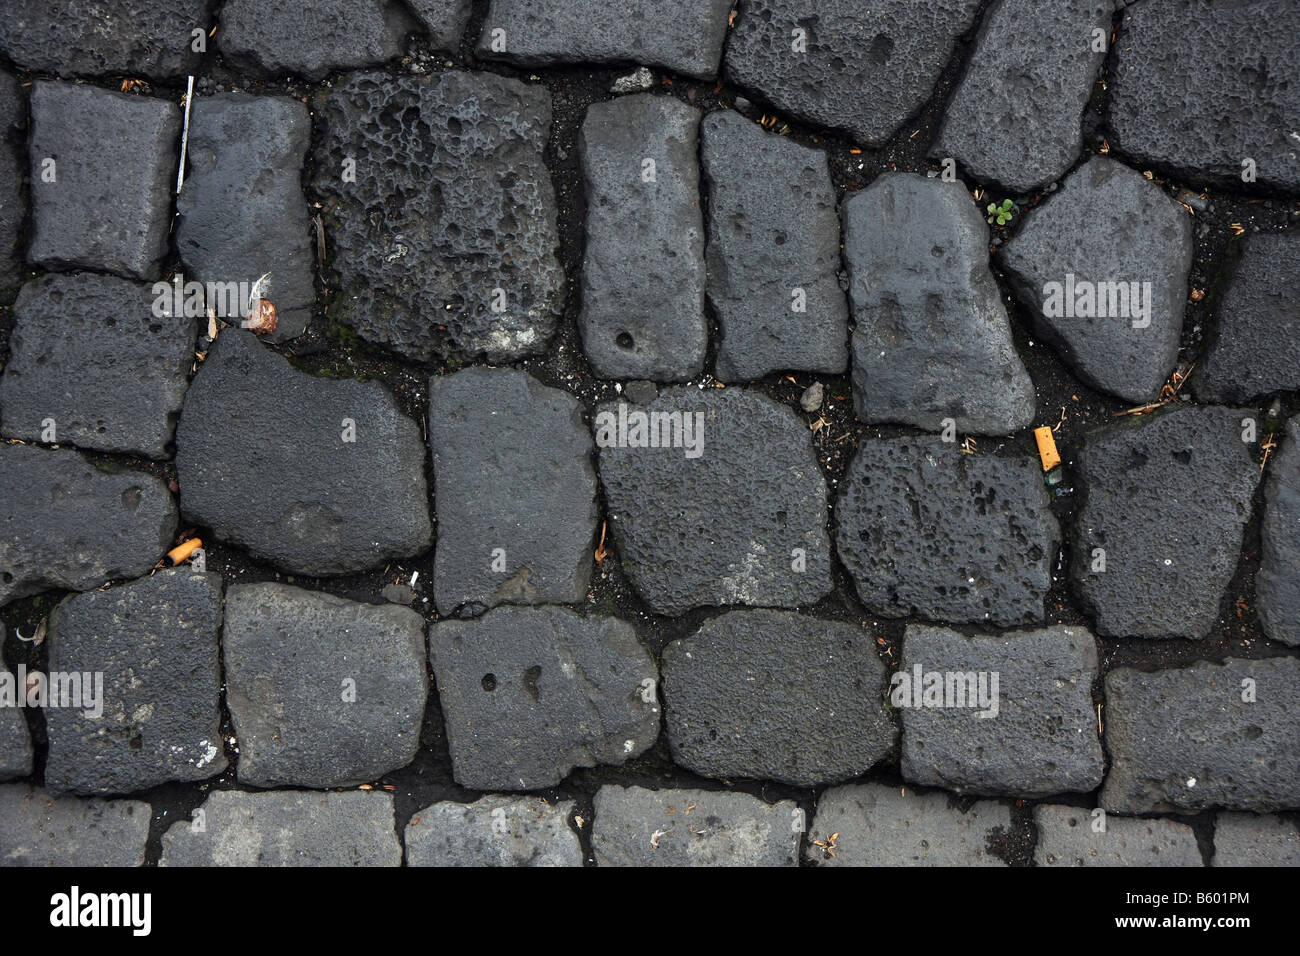 Paving stones made of black lava in the streets of Ponta Delgada Azores Portugal Stock Photo